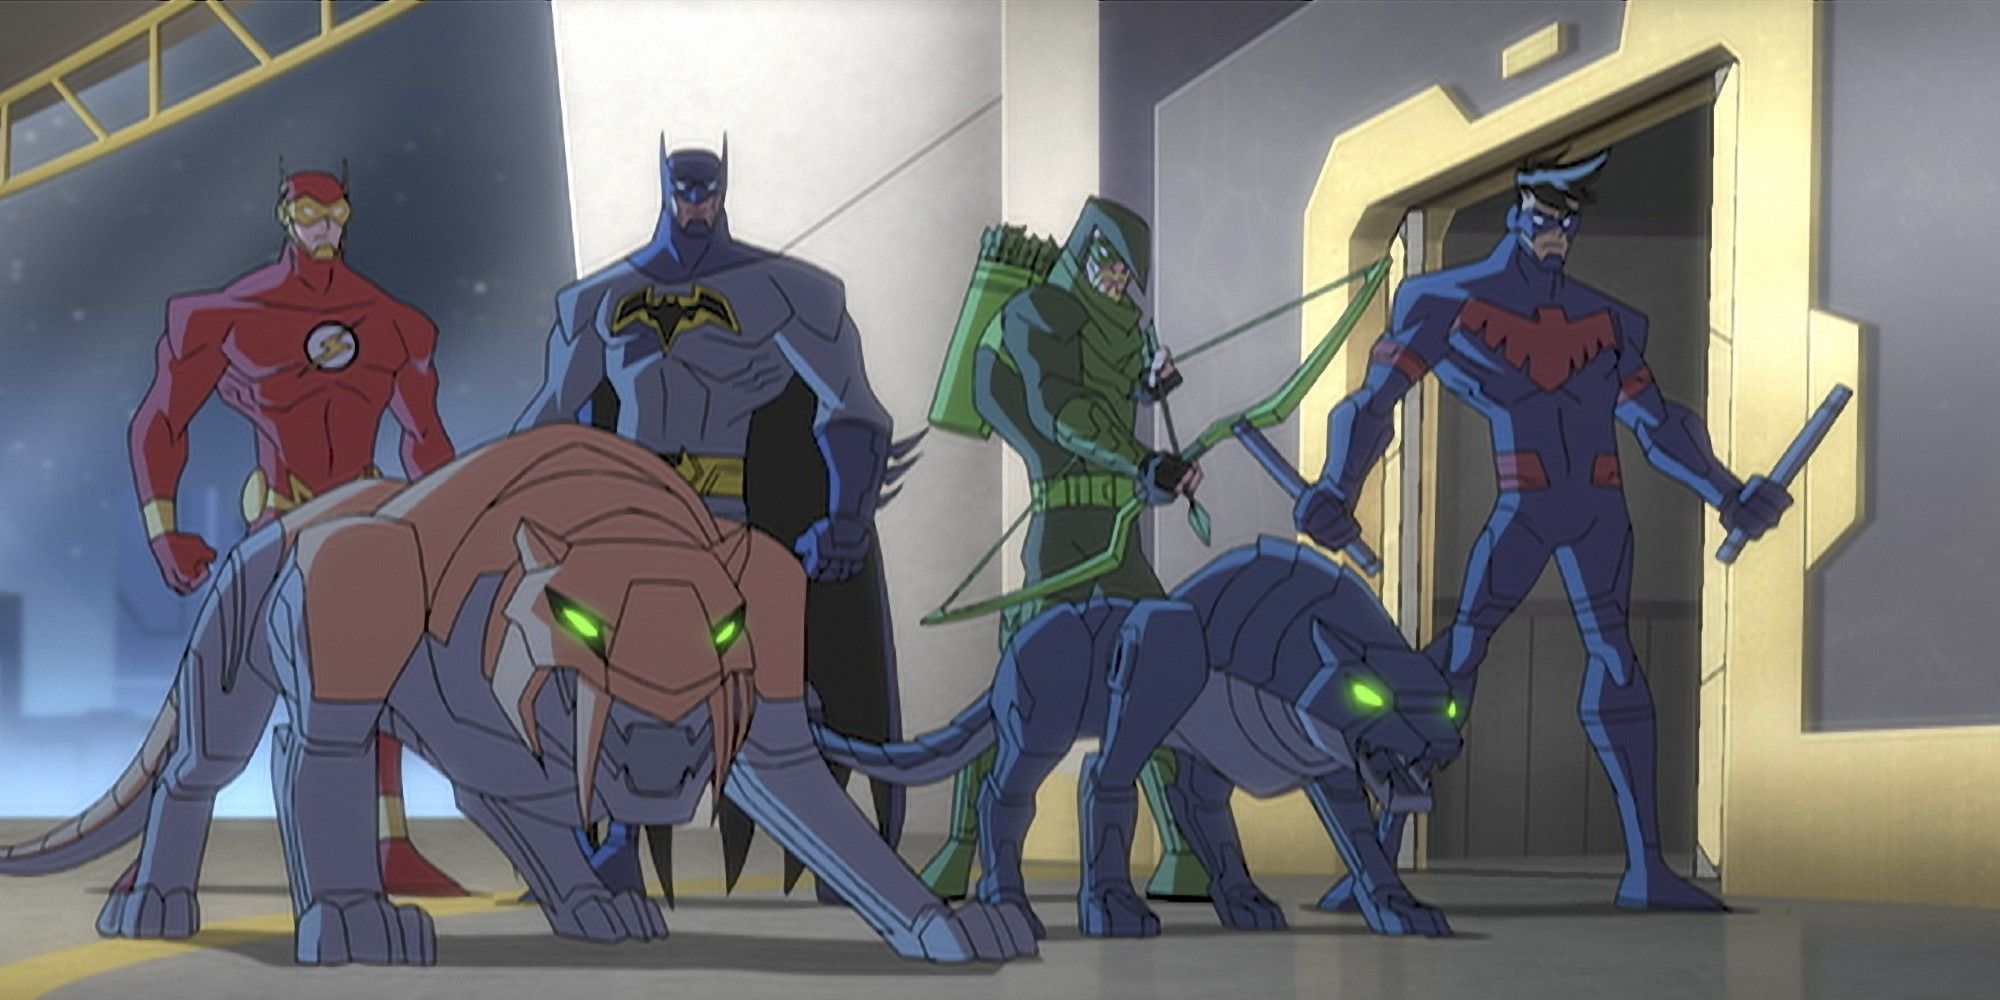 Batman animal instincts, the justice league lined up with robots